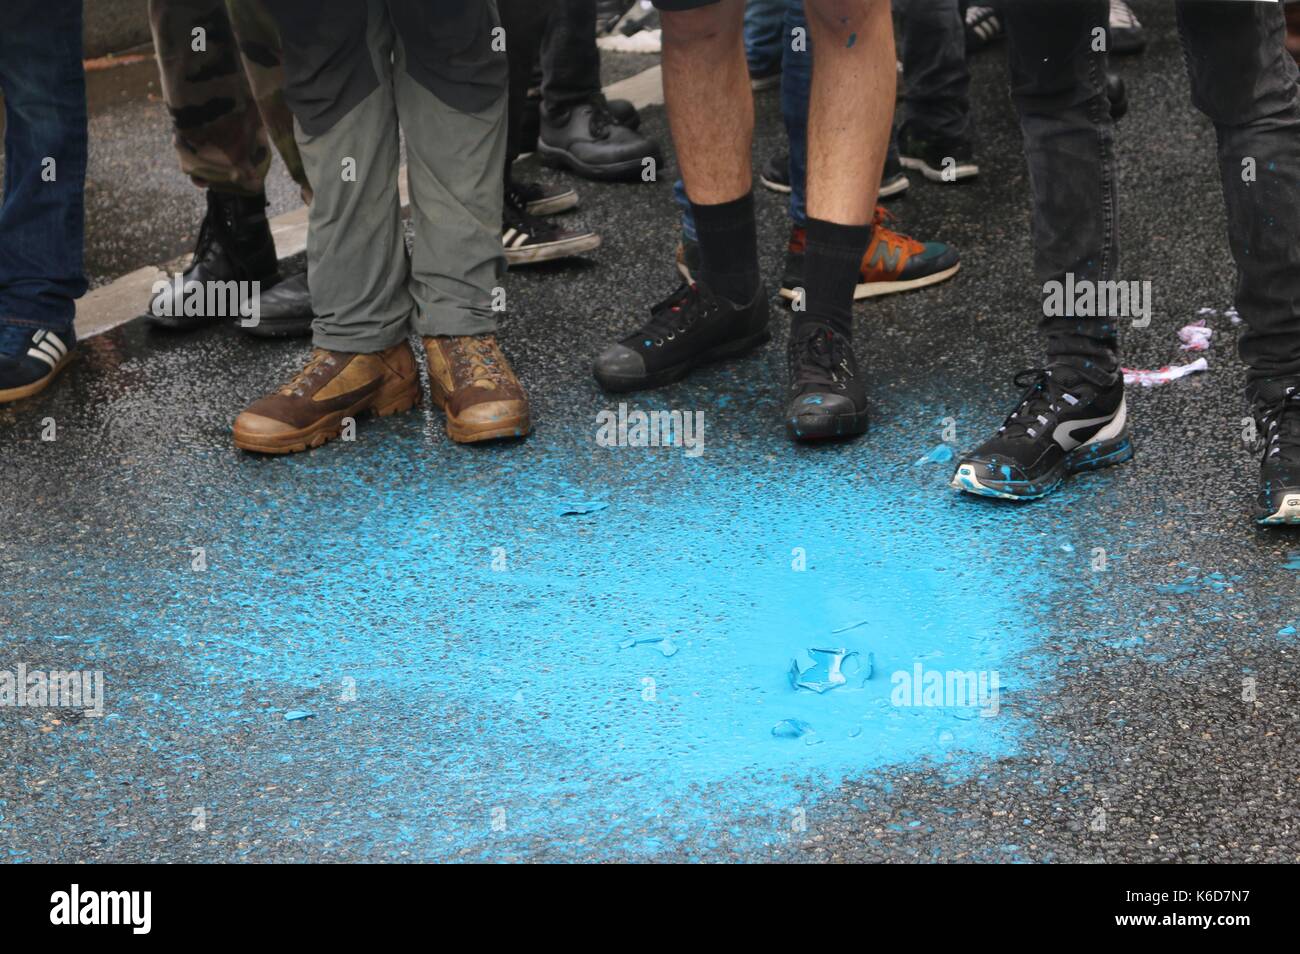 Paris, France. 12th Sep, 2017. A paintbomb is thrown during a Loi Travail march in Paris Credit: Conall Kearney/Alamy Live News Stock Photo